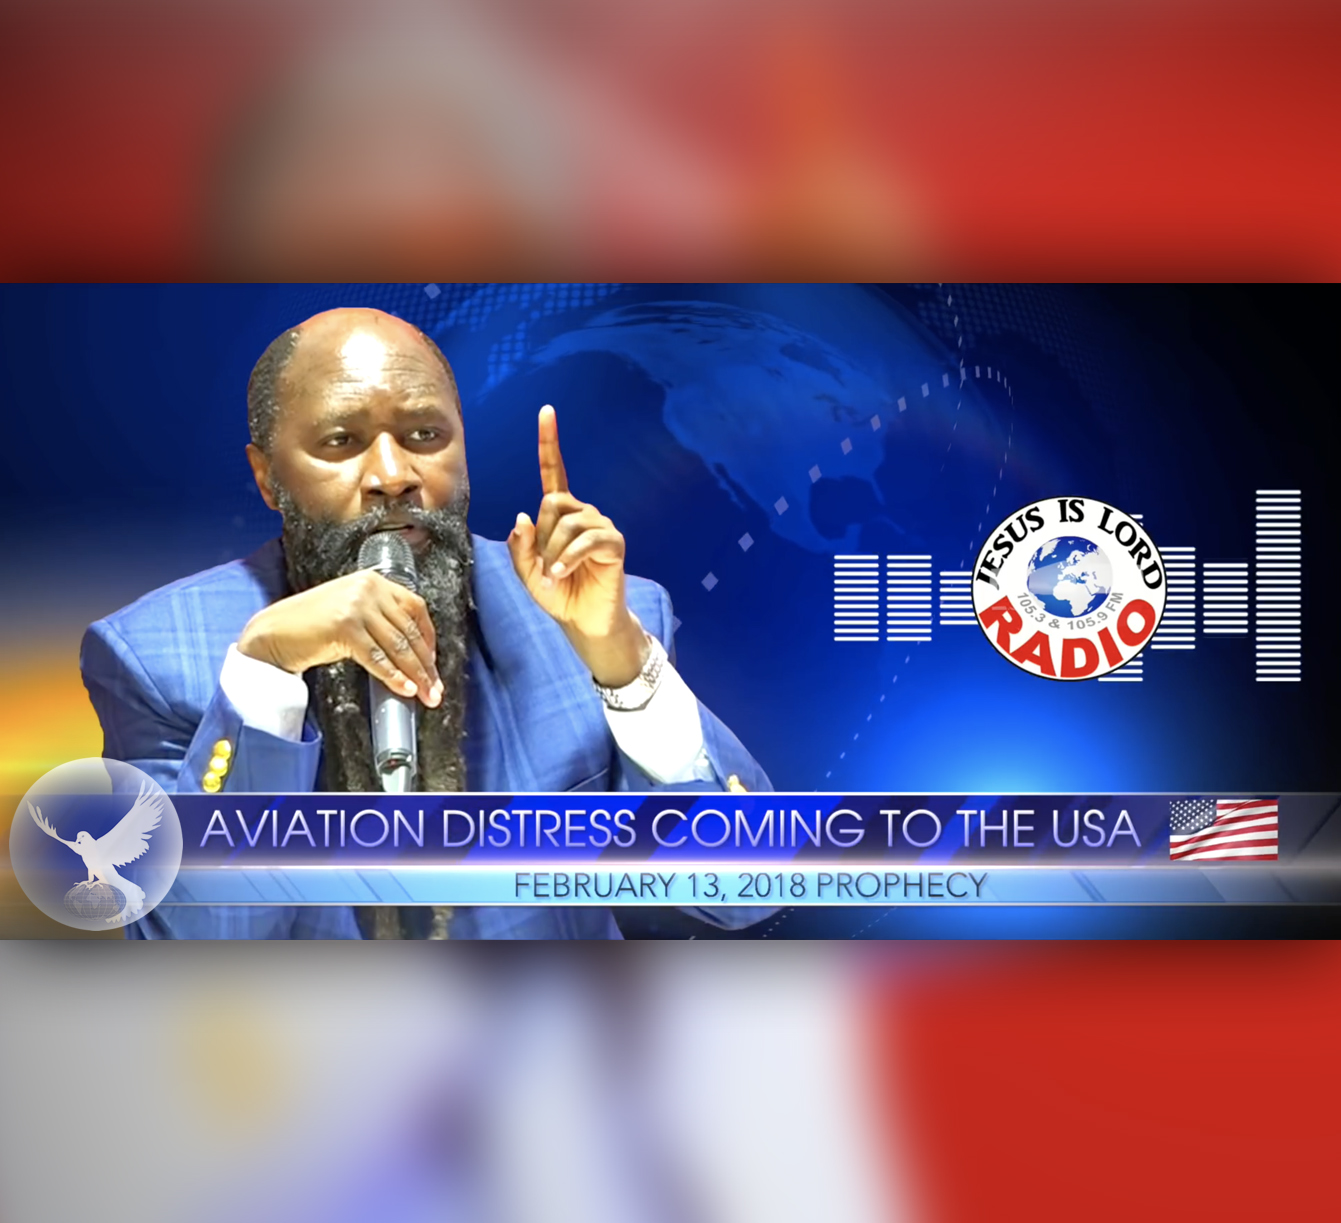 EPISODE 135 - PROPHECY OF AN AVIATION DISTRESS COMING TO THE USA (13FEB2018) - PROPHET DR. OWUOR